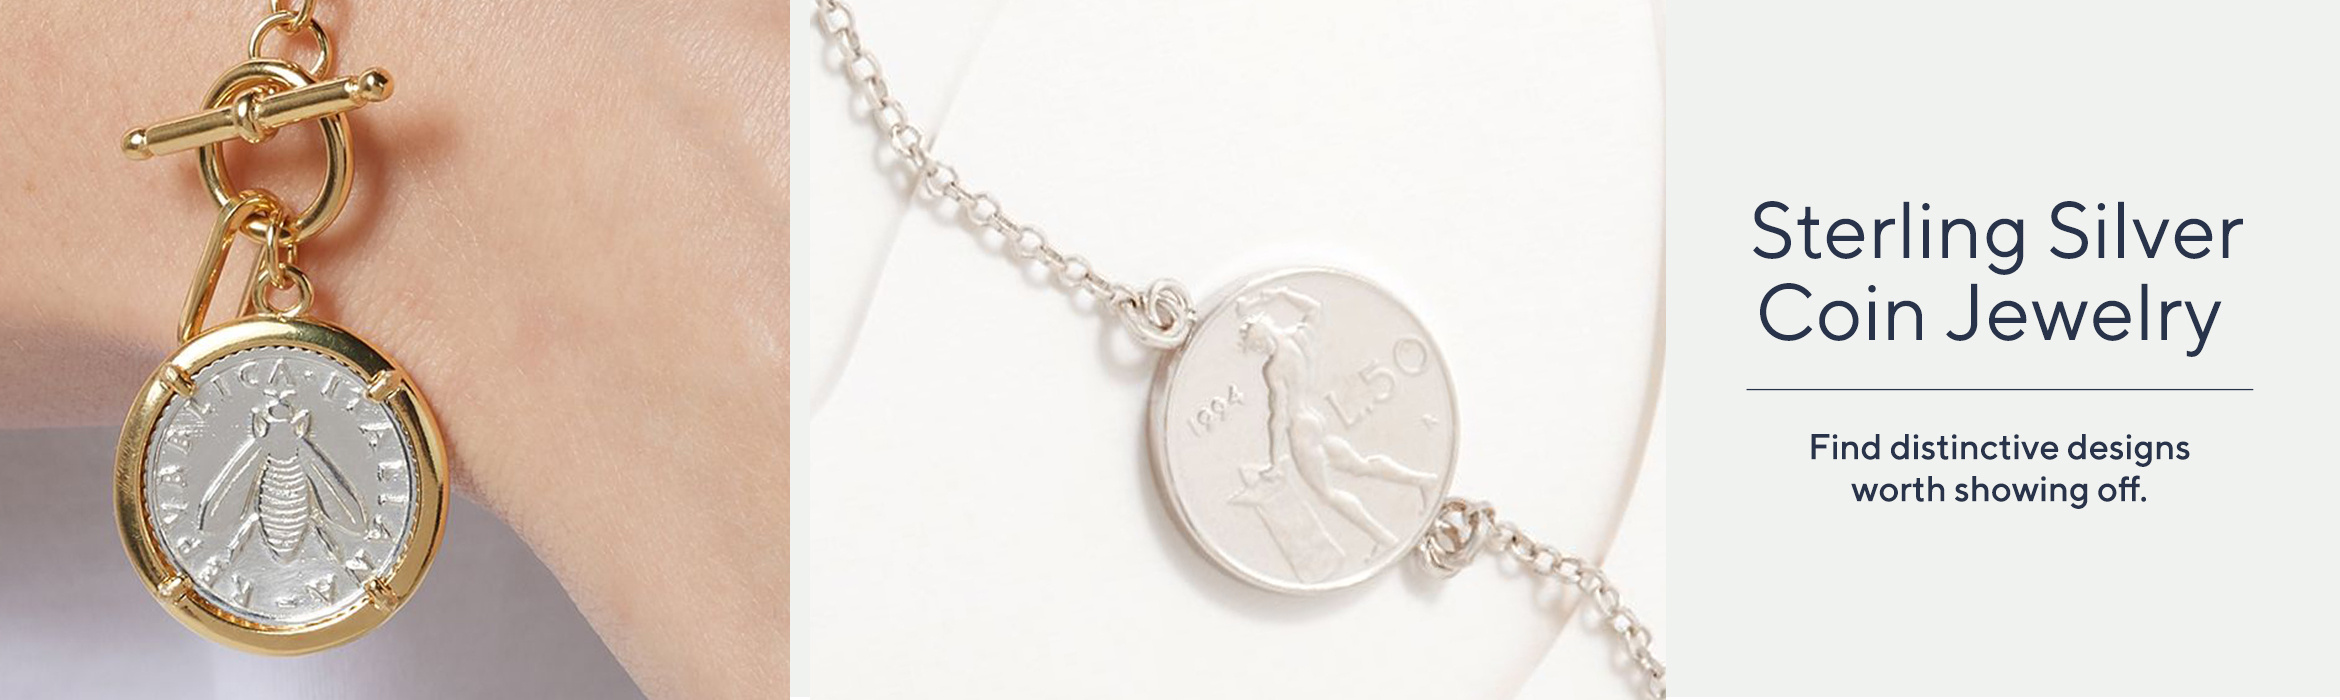 Sterling Silver Coin Jewelry   Find distinctive designs worth showing off.